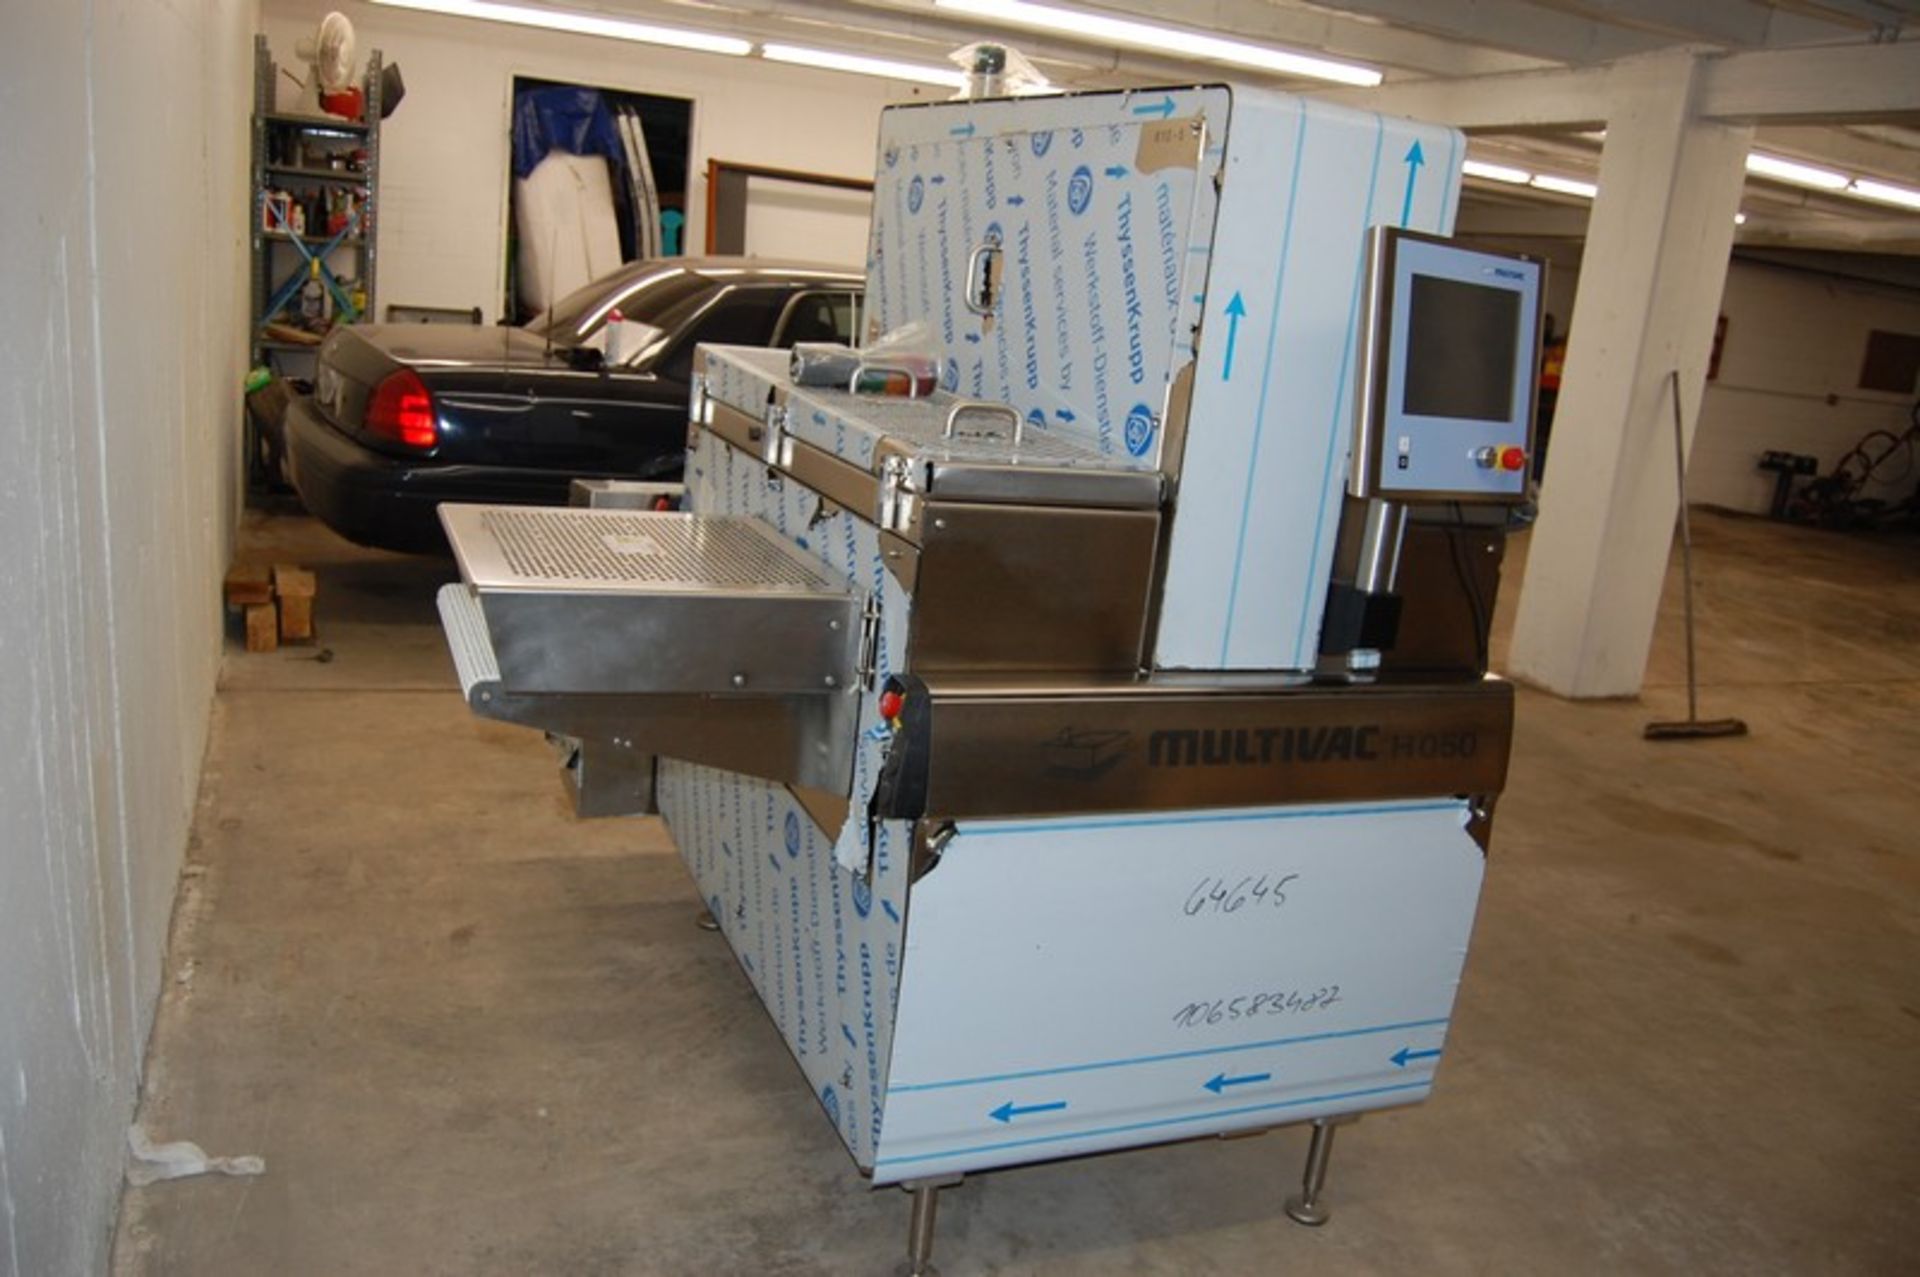 NEW 2012 MultiVac Vacuum Packager, Type: H050, S/N 158612, 208/120 Volts (LOCATED IN BELTSVILLE, MD) - Image 10 of 14